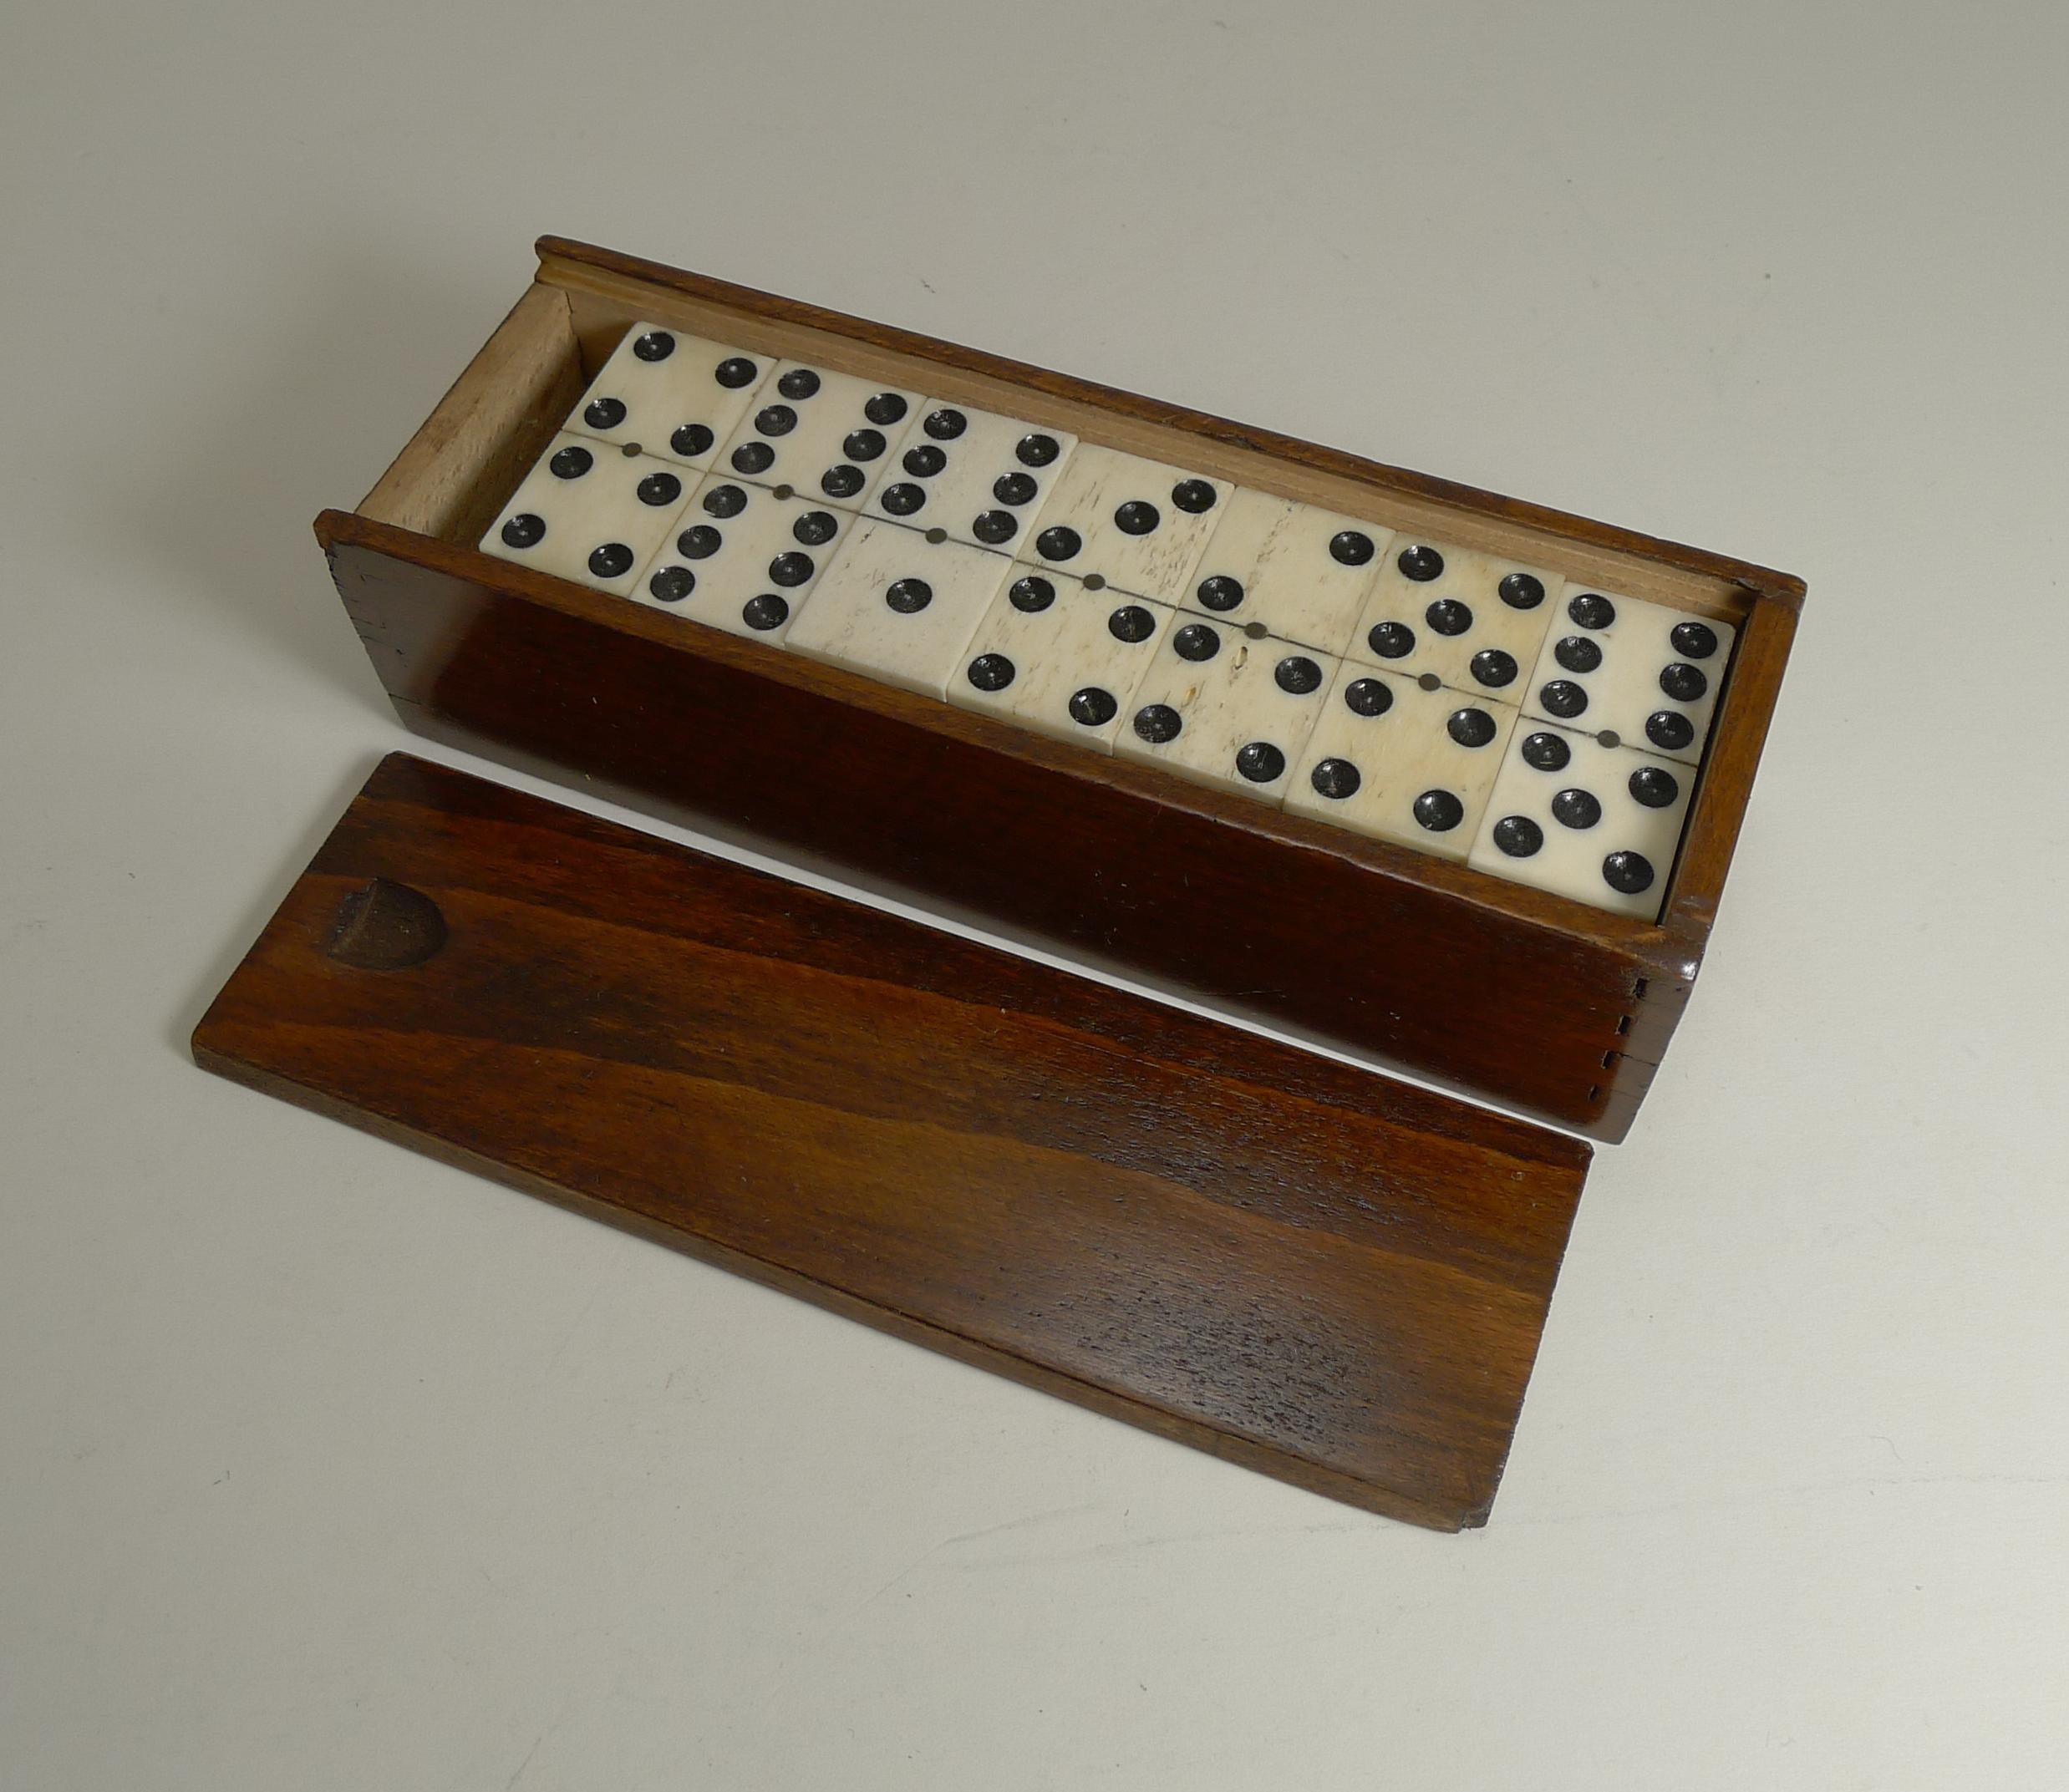 A charming set of late Edwardian dominoes or dominos, all in good condition with a handsome polished wooden storage box with a sliding lid.

The bone and ebony pinned together with small brass pins.

The box measures 7 5/8